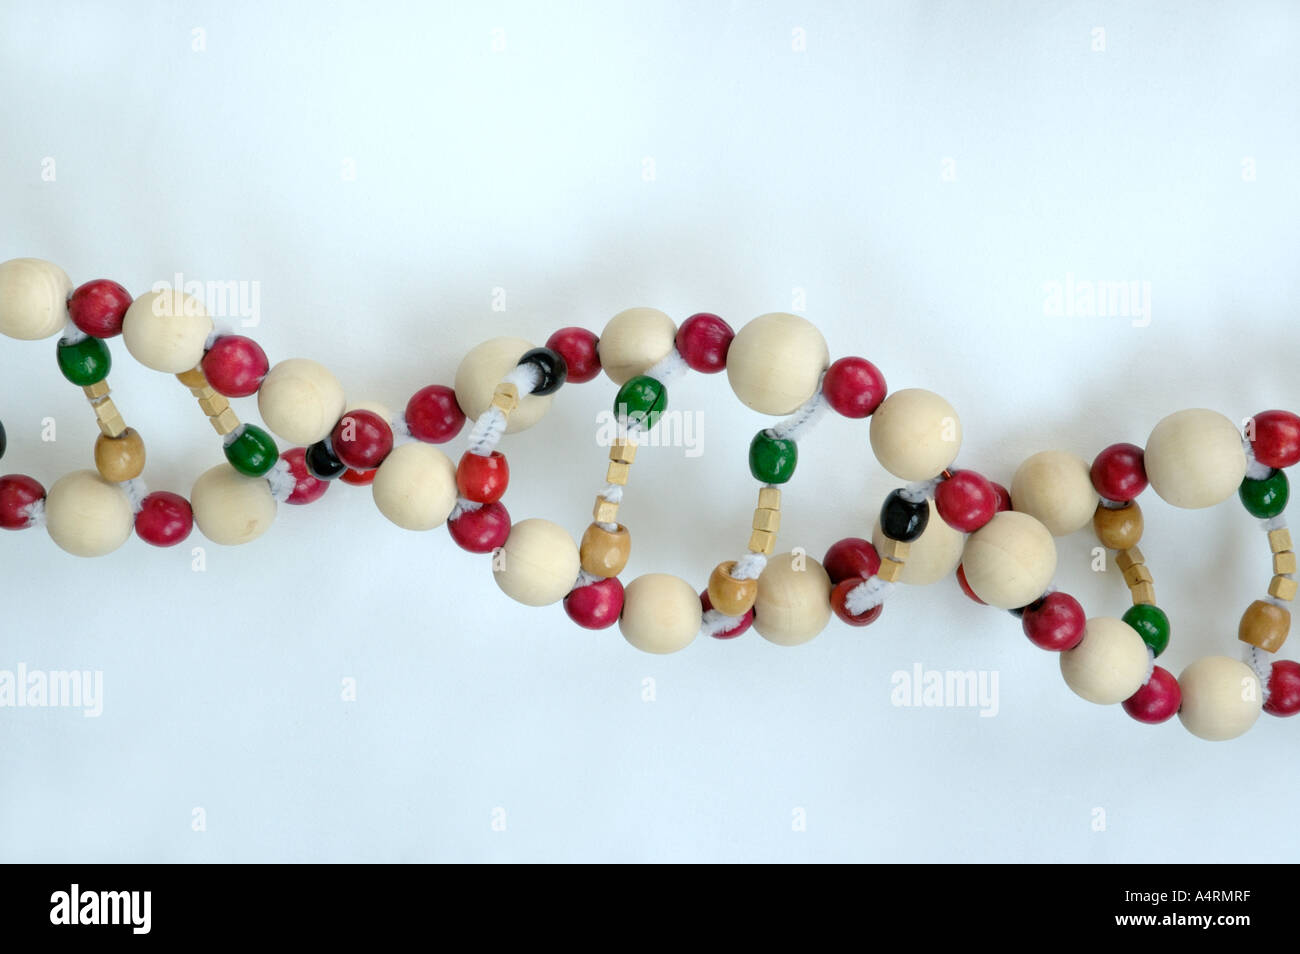 DNA double helix model made of beads Stock Photo